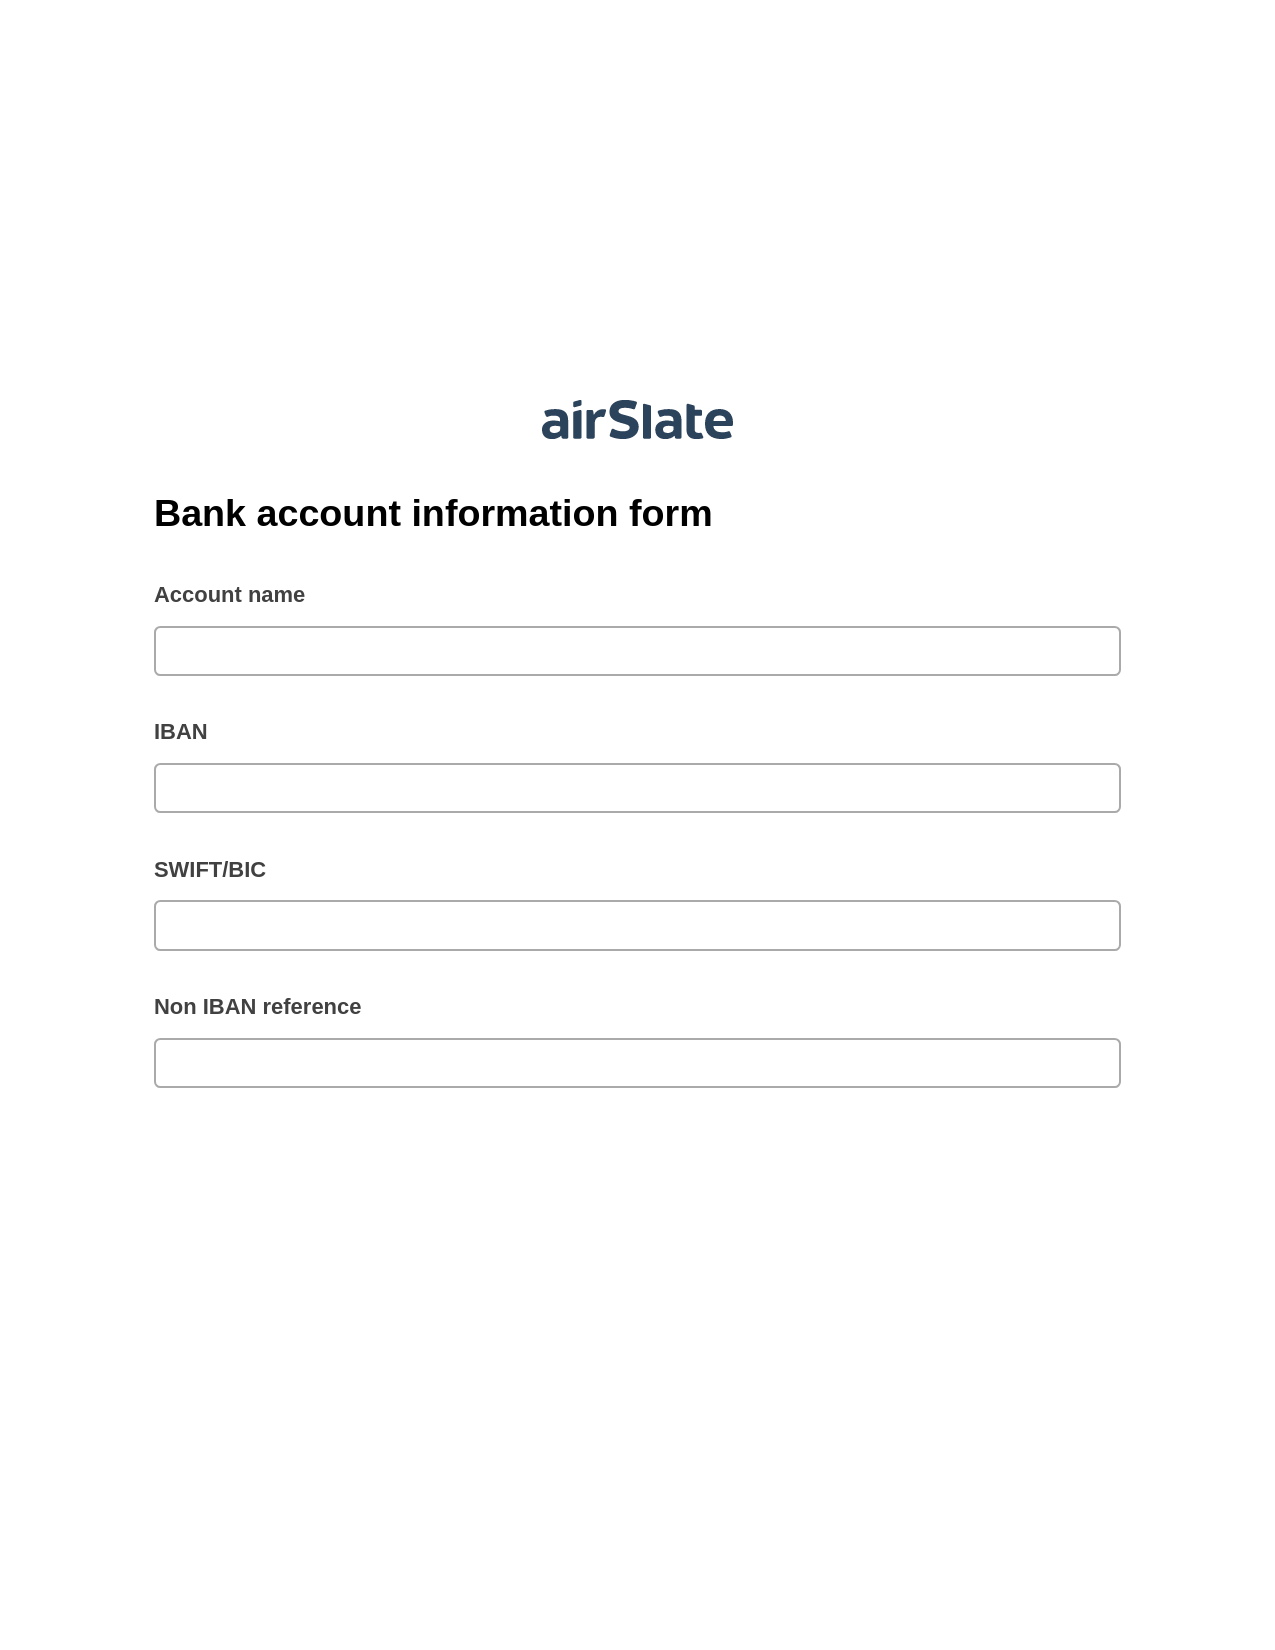 Multirole Bank account information form Pre-fill Dropdown from Airtable, Update NetSuite Records Bot, Archive to SharePoint Folder Bot